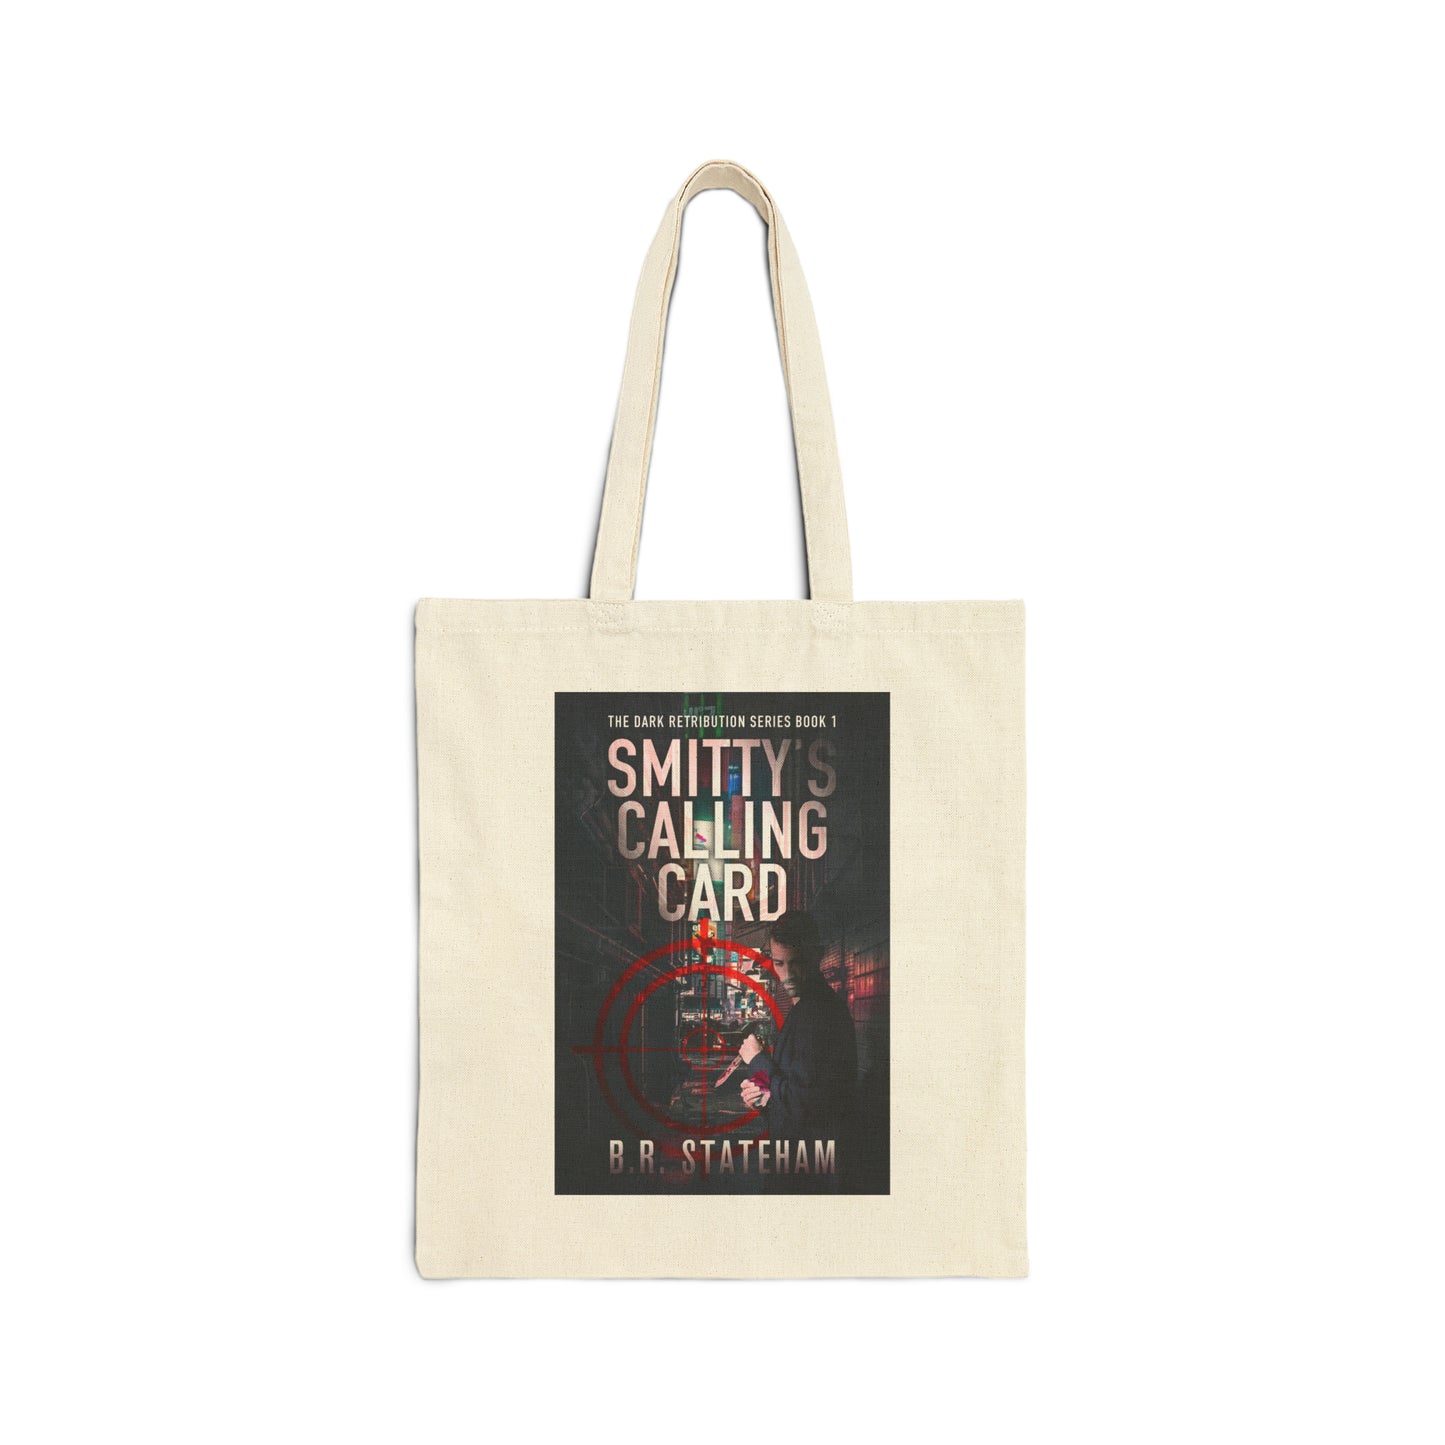 Smitty's Calling Card - Cotton Canvas Tote Bag